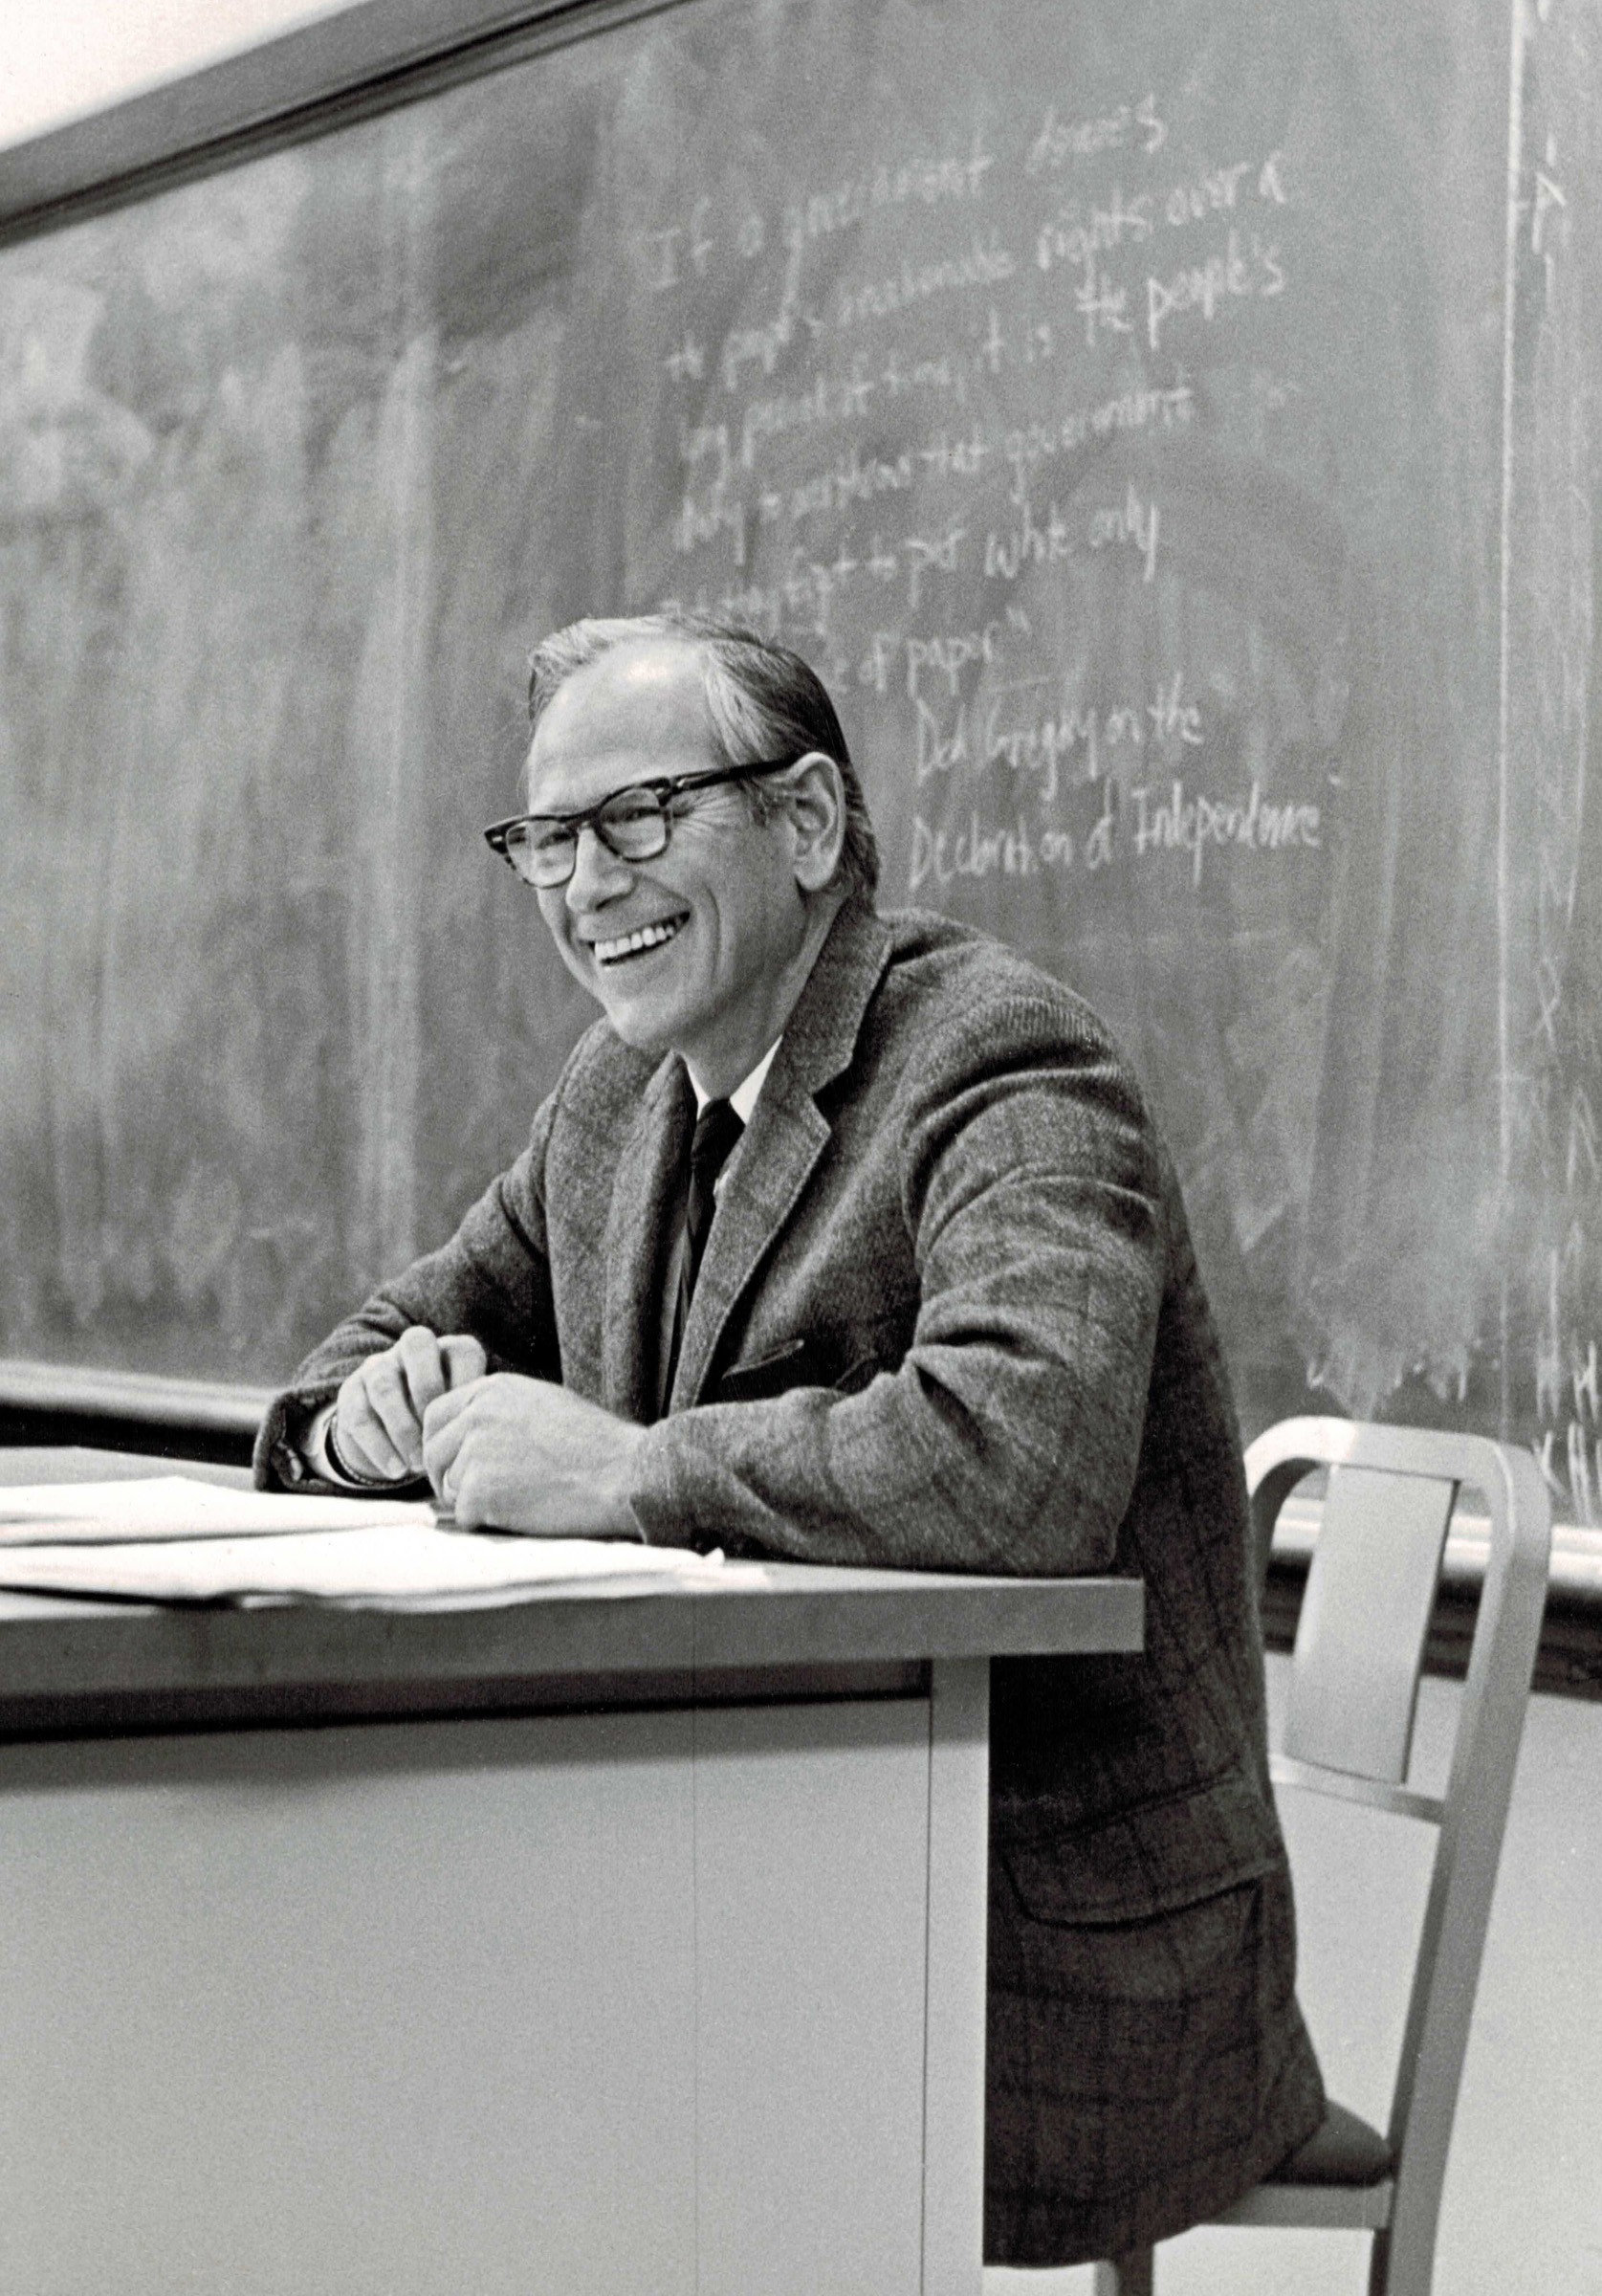 Dahl teaching a political science class at [[Yale University]]